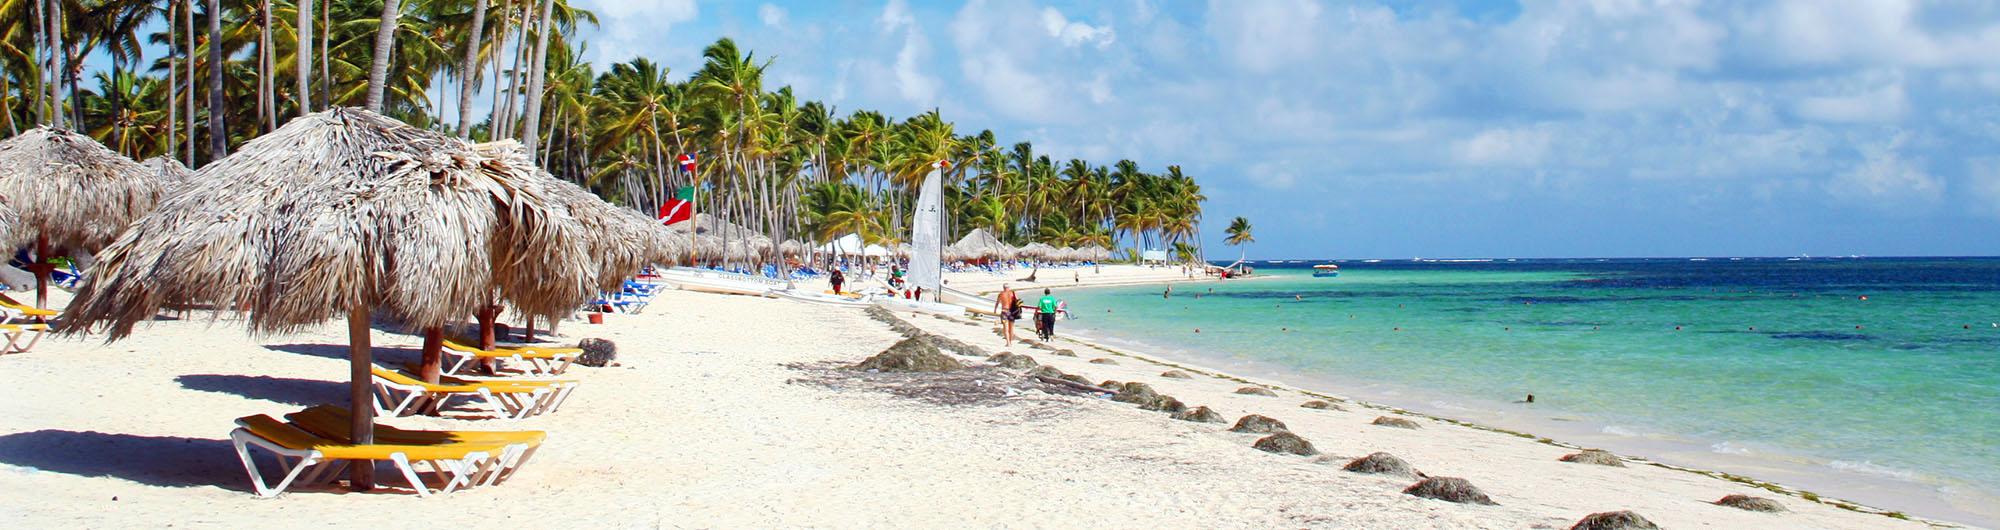 Search and compare cheap flights from Dominica to Punta Cana